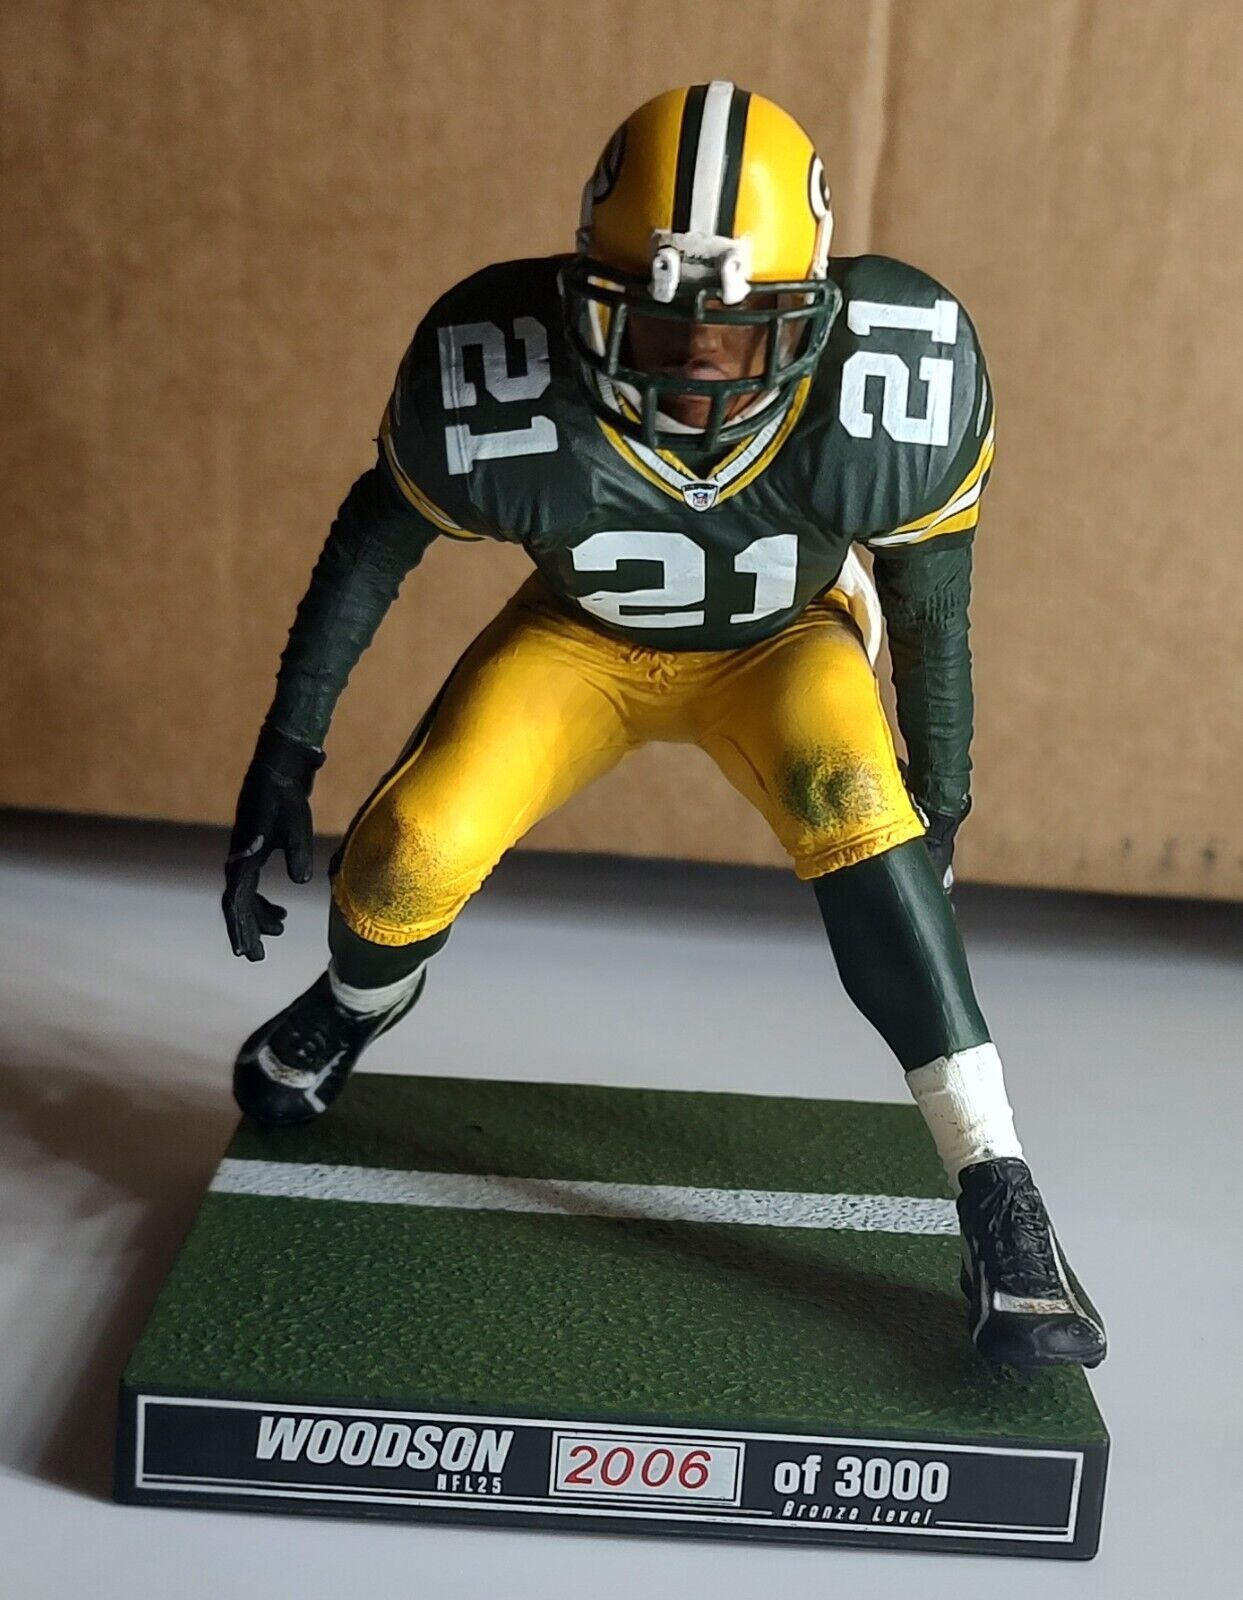 Awesome McFarlane Charles Woodson Figure Packers Series 25 Bronze Level CL NFL Football on eBay